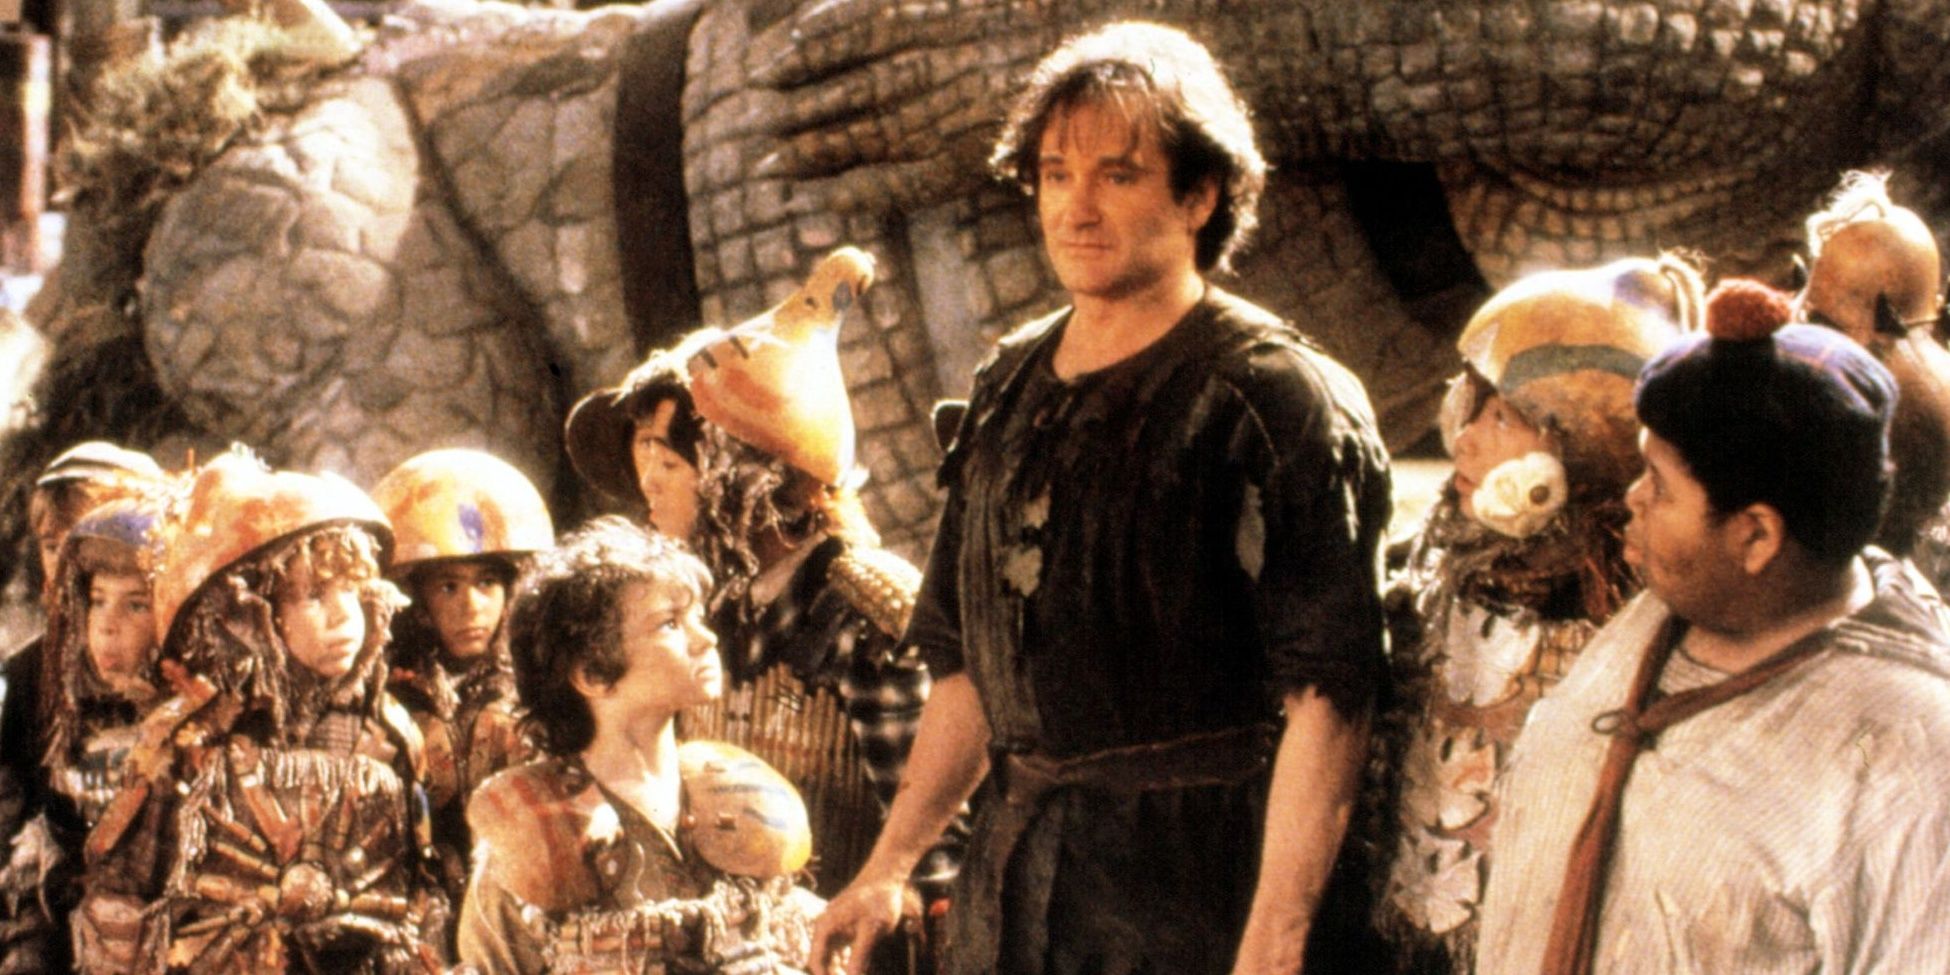 A middle aged Peter Pan stands with the much younger lost boys in Hook